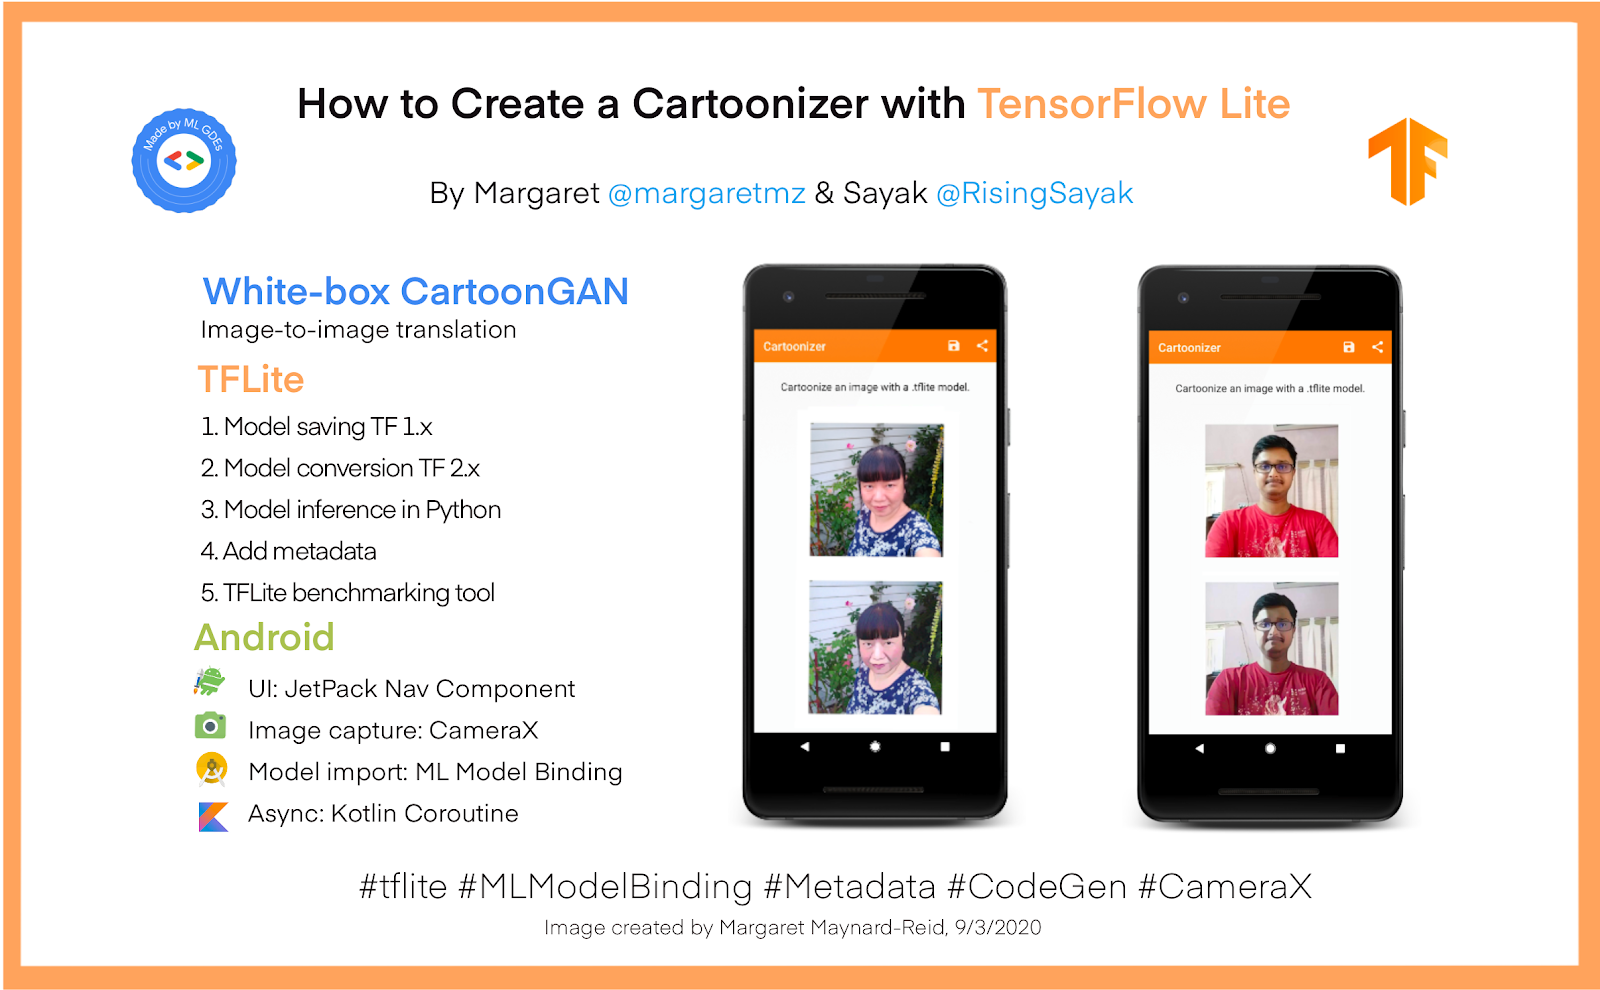 How to Create a Cartoonizer with TensorFlow Lite